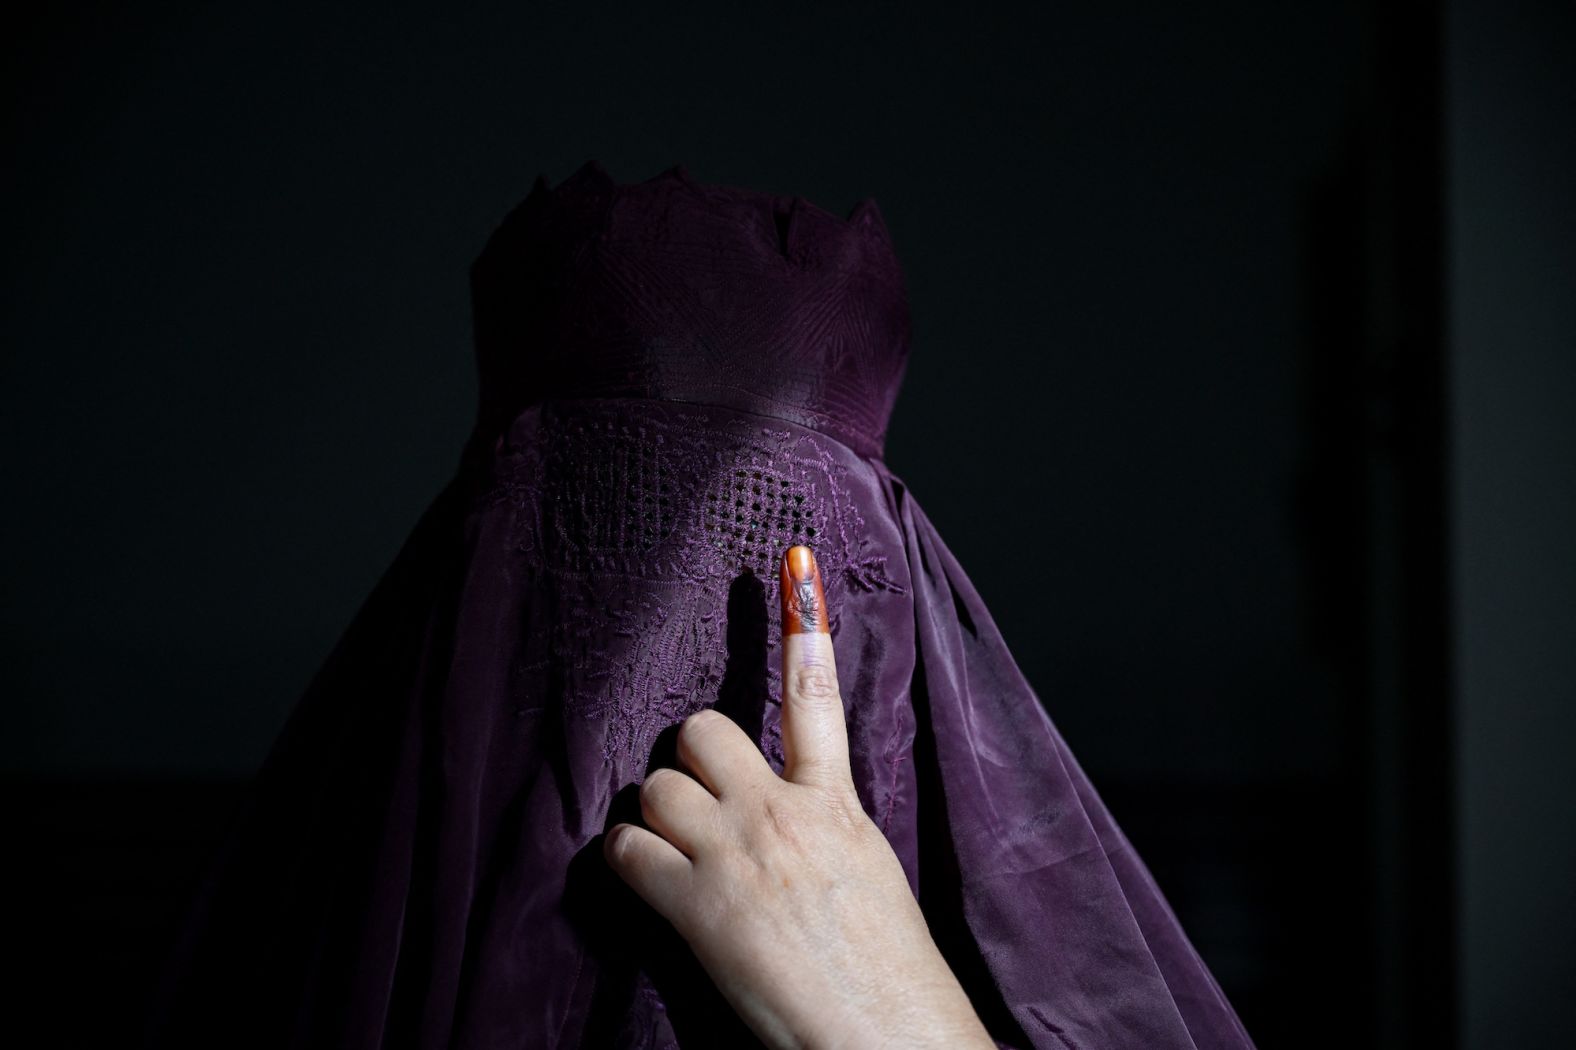 A burqa-clad woman shows her inked finger after she cast a ballot in Kairana, India, on Friday, April 19. A mammoth exercise in democracy is underway in India, where nearly a billion people will go to the polls over the next six weeks to vote in <a href="https://www.cnn.com/2024/04/17/india/india-election-2024-hnk-intl-dg/index.html" target="_blank">the world's largest-ever general election</a>.